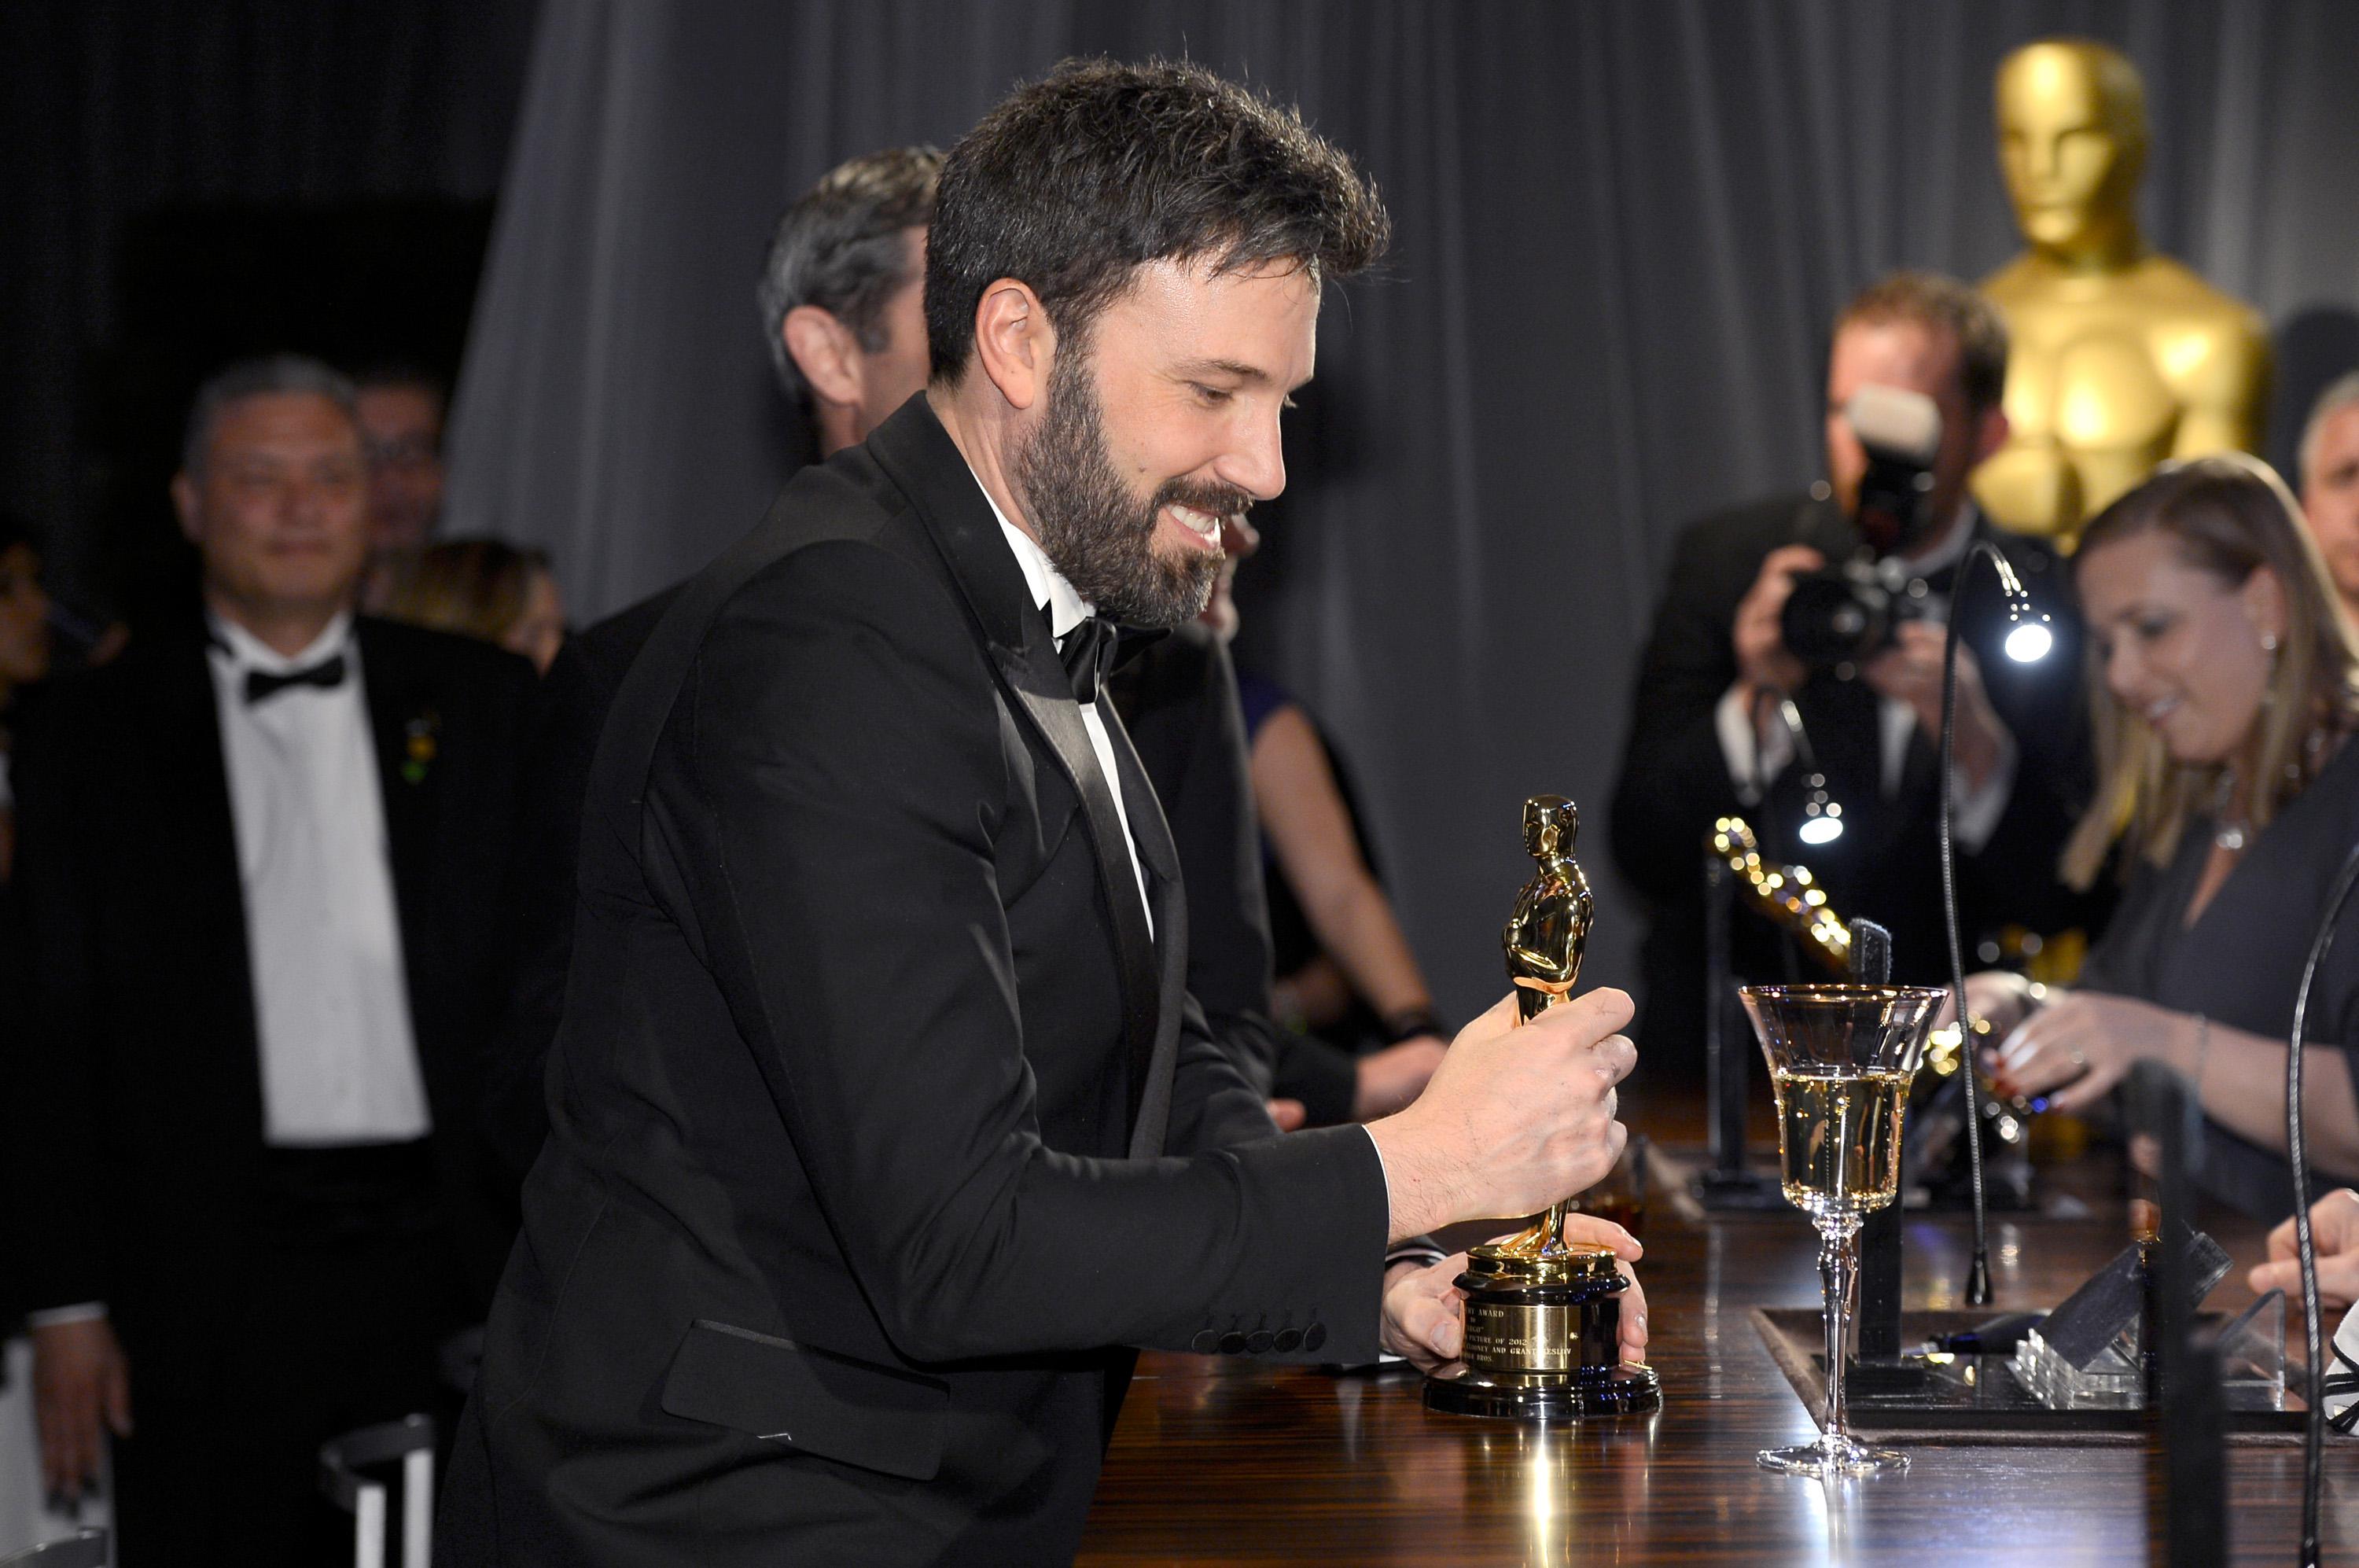 85th Annual Academy Awards - Governors Ball